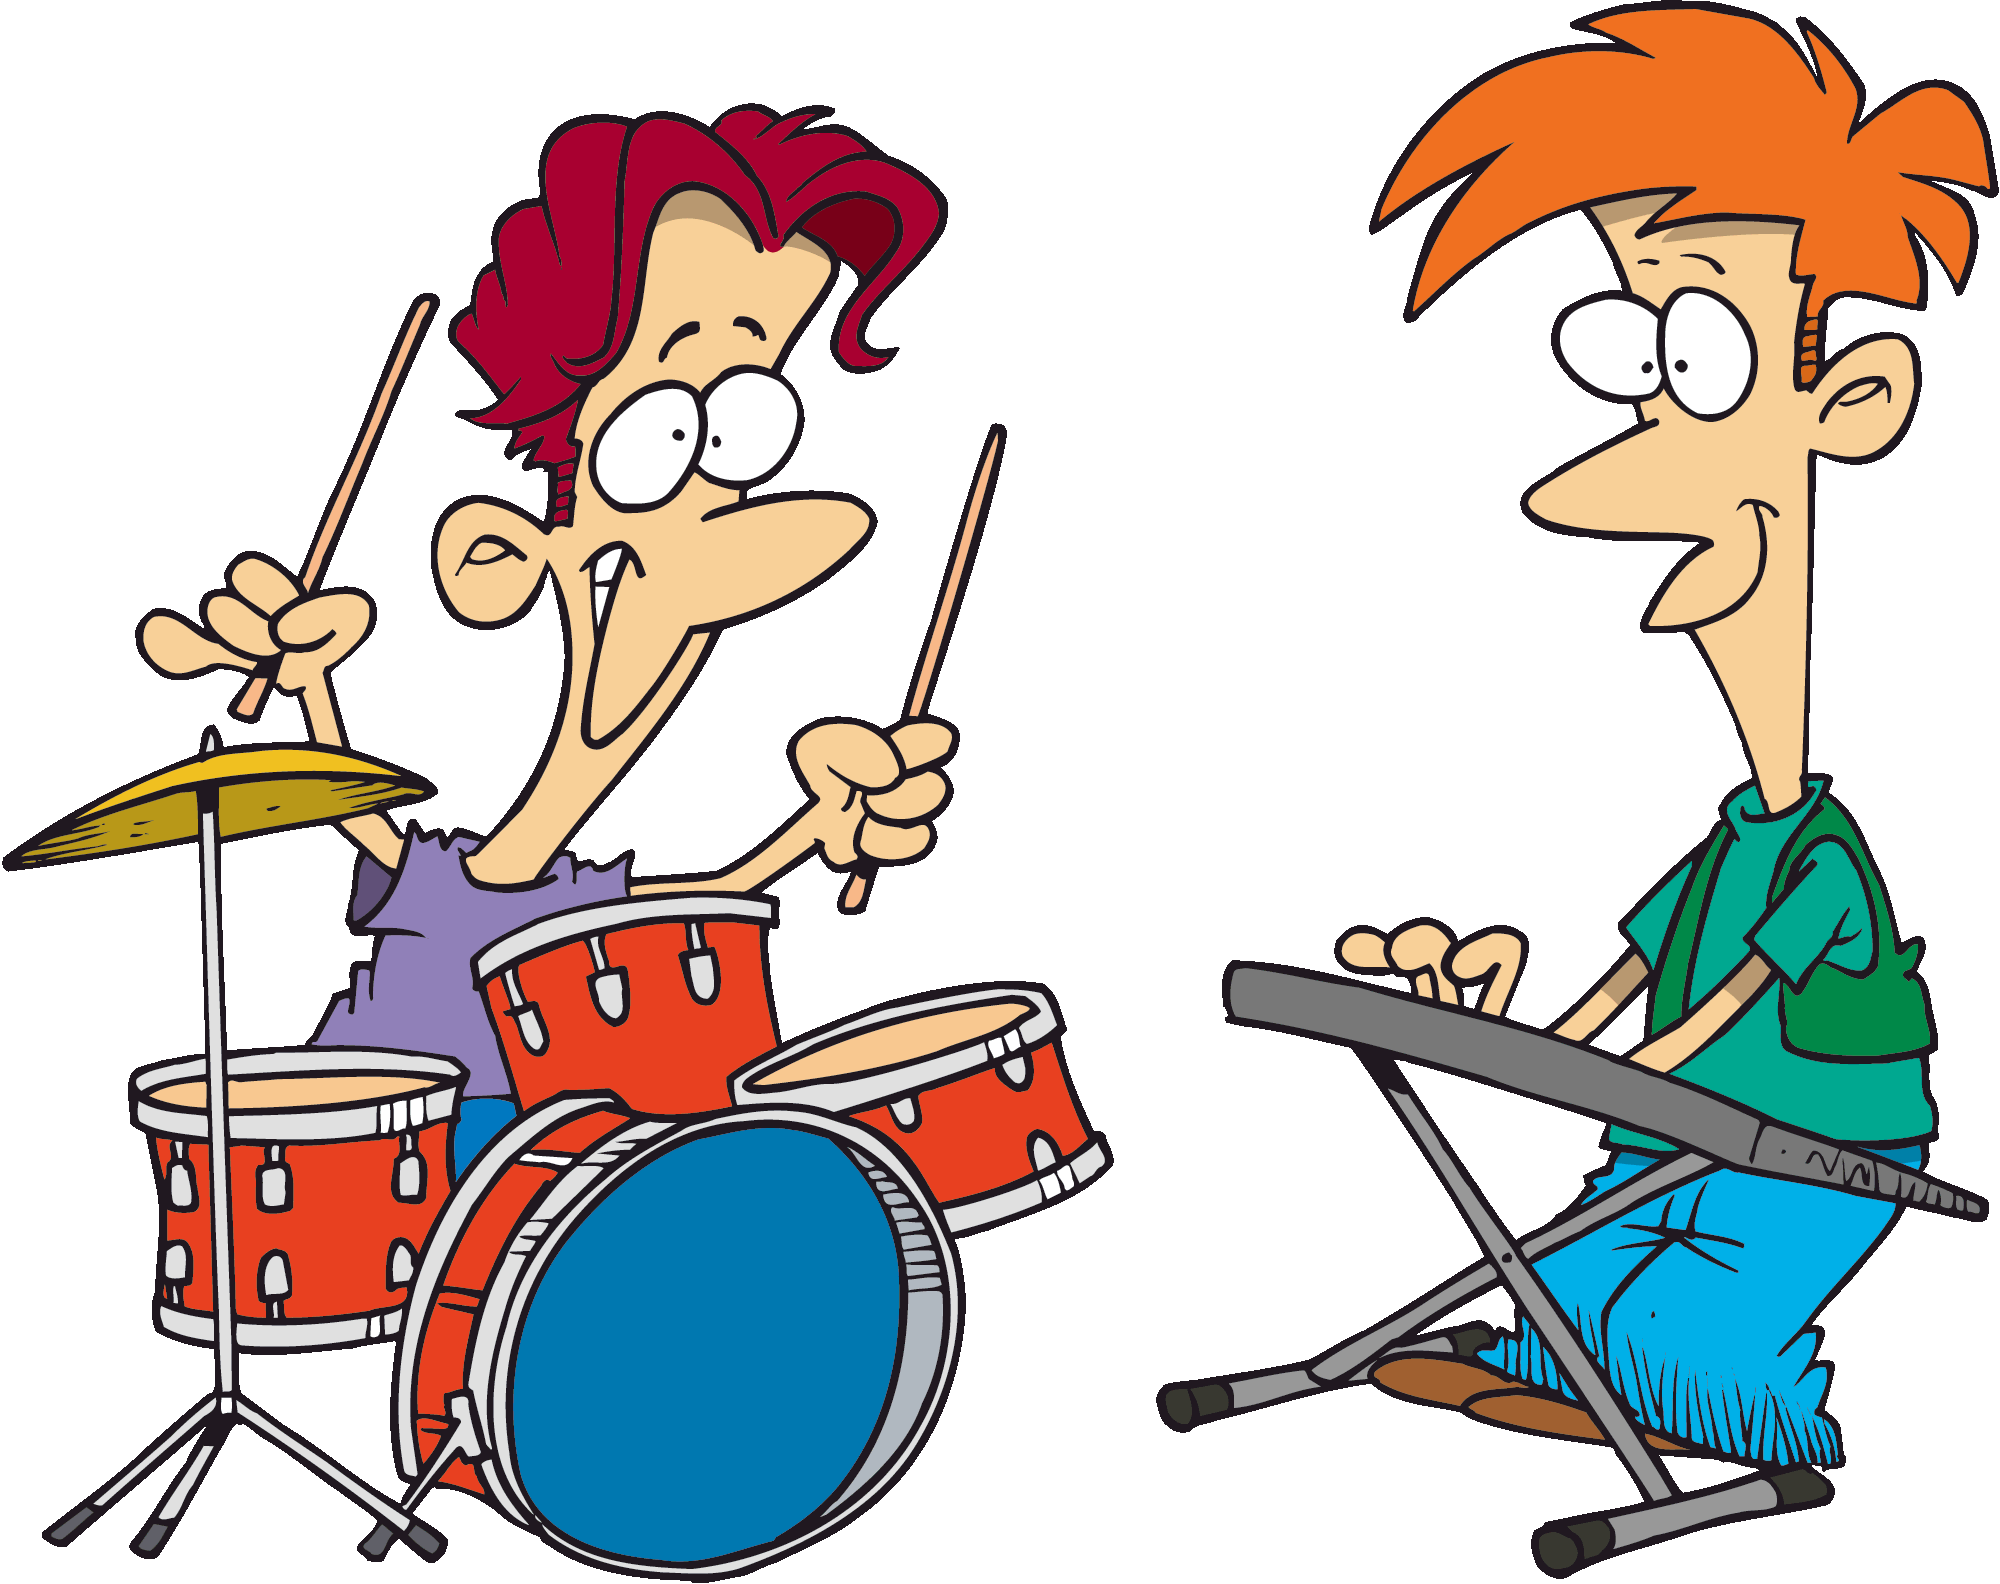 Clip art band and orchestra clipart - dbclipart.com